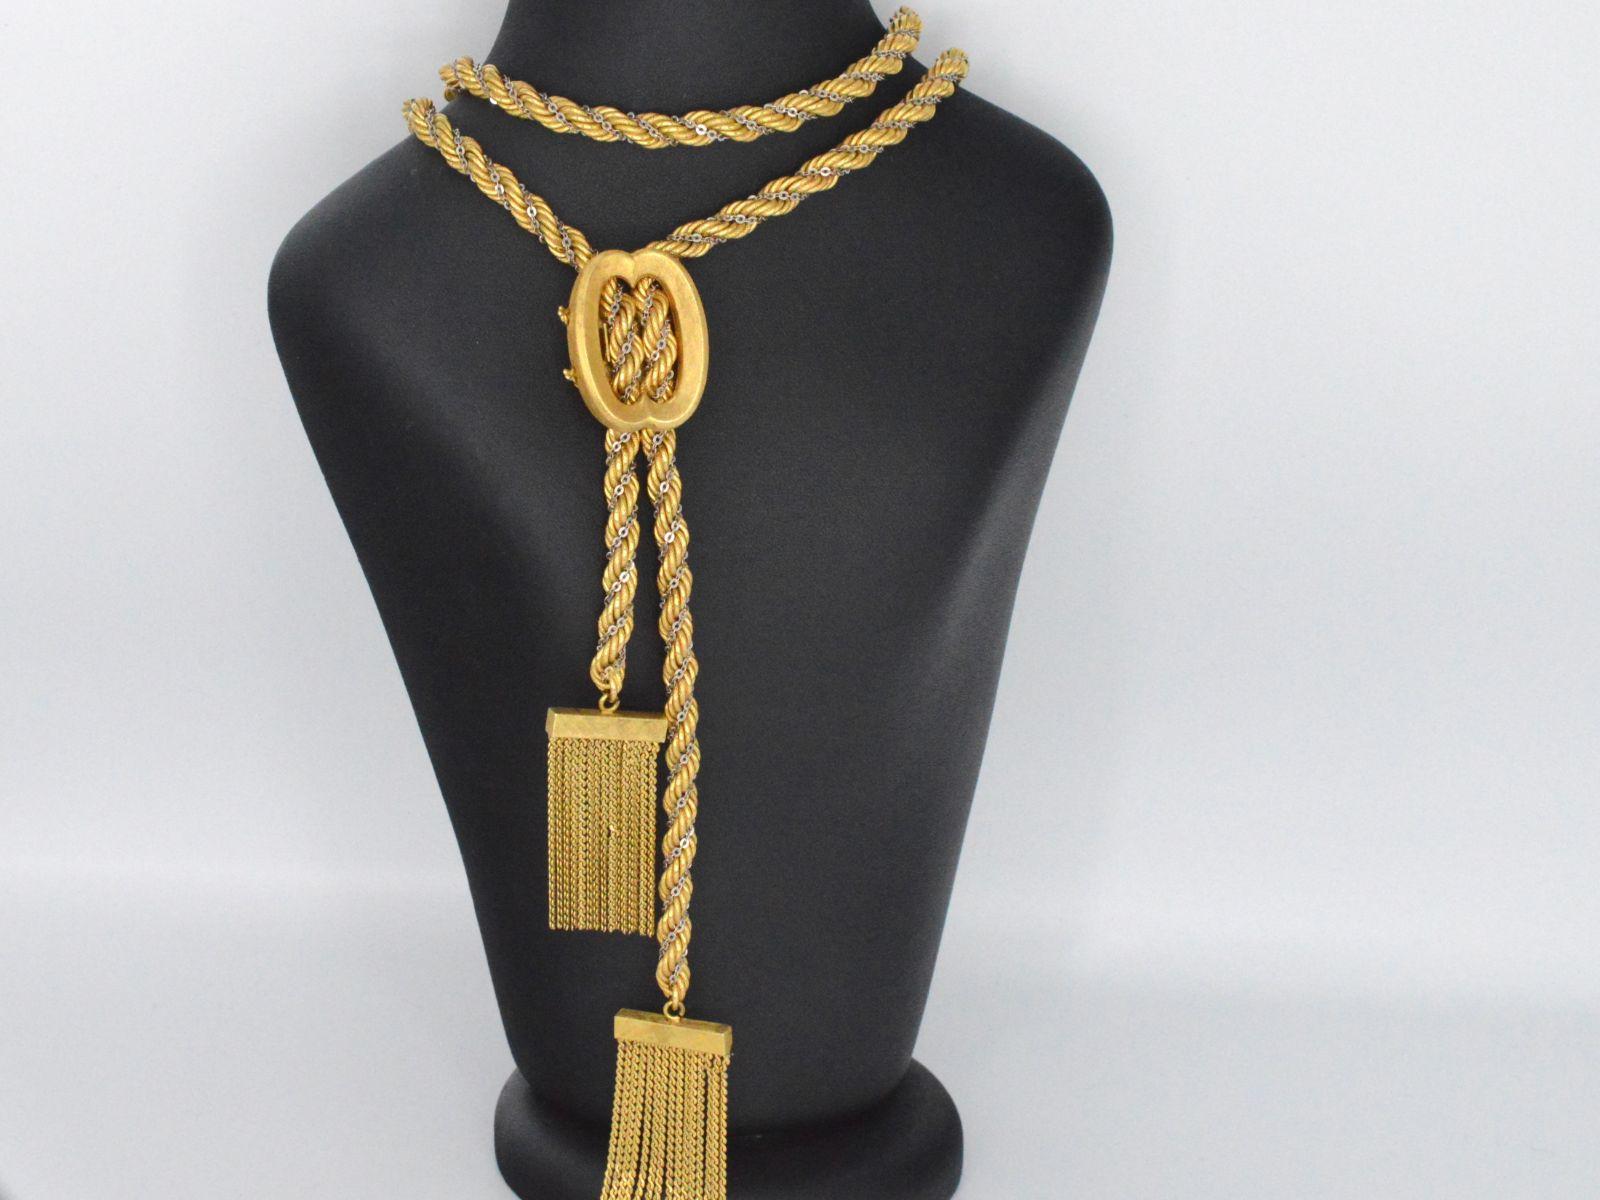 Jewel: Necklace; Weight: 117.8 grams; Length: 110 cm (adjustable closure); Hallmark: 18 kt gold 750; Condition: As good as new; The quality has been taken from the certificate belonging to the item; Retail value: € 26,550